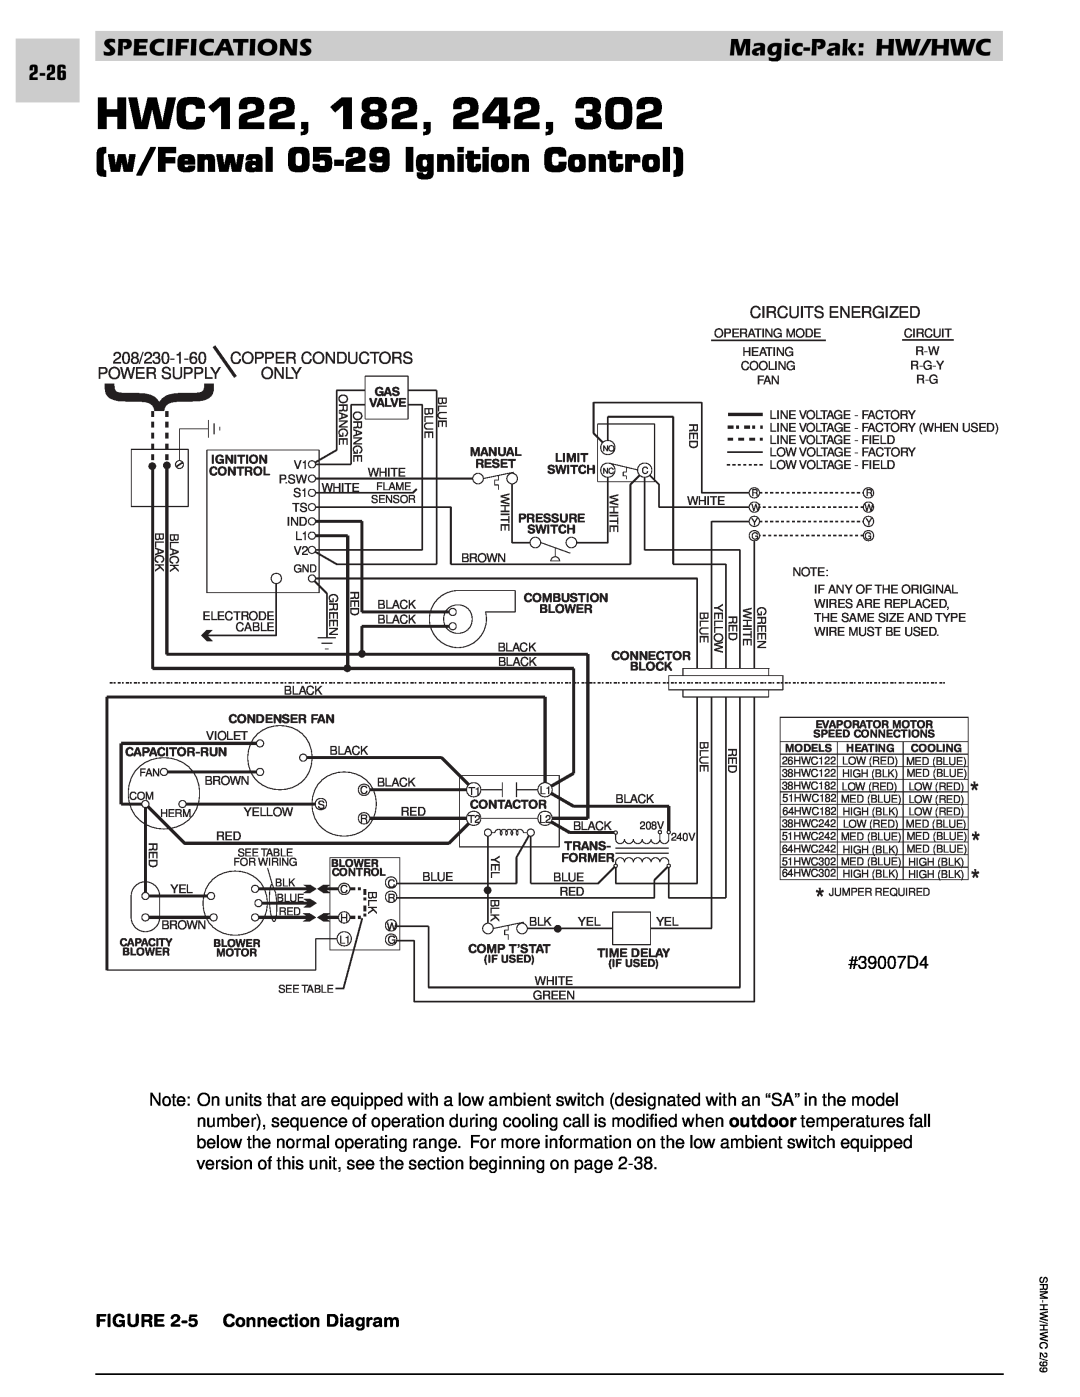 Armstrong World Industries 123, 243, 302, 203, 183 w/Fenwal 05-29 Ignition Control, HWC122, 182, 242, 5 Connection Diagram 